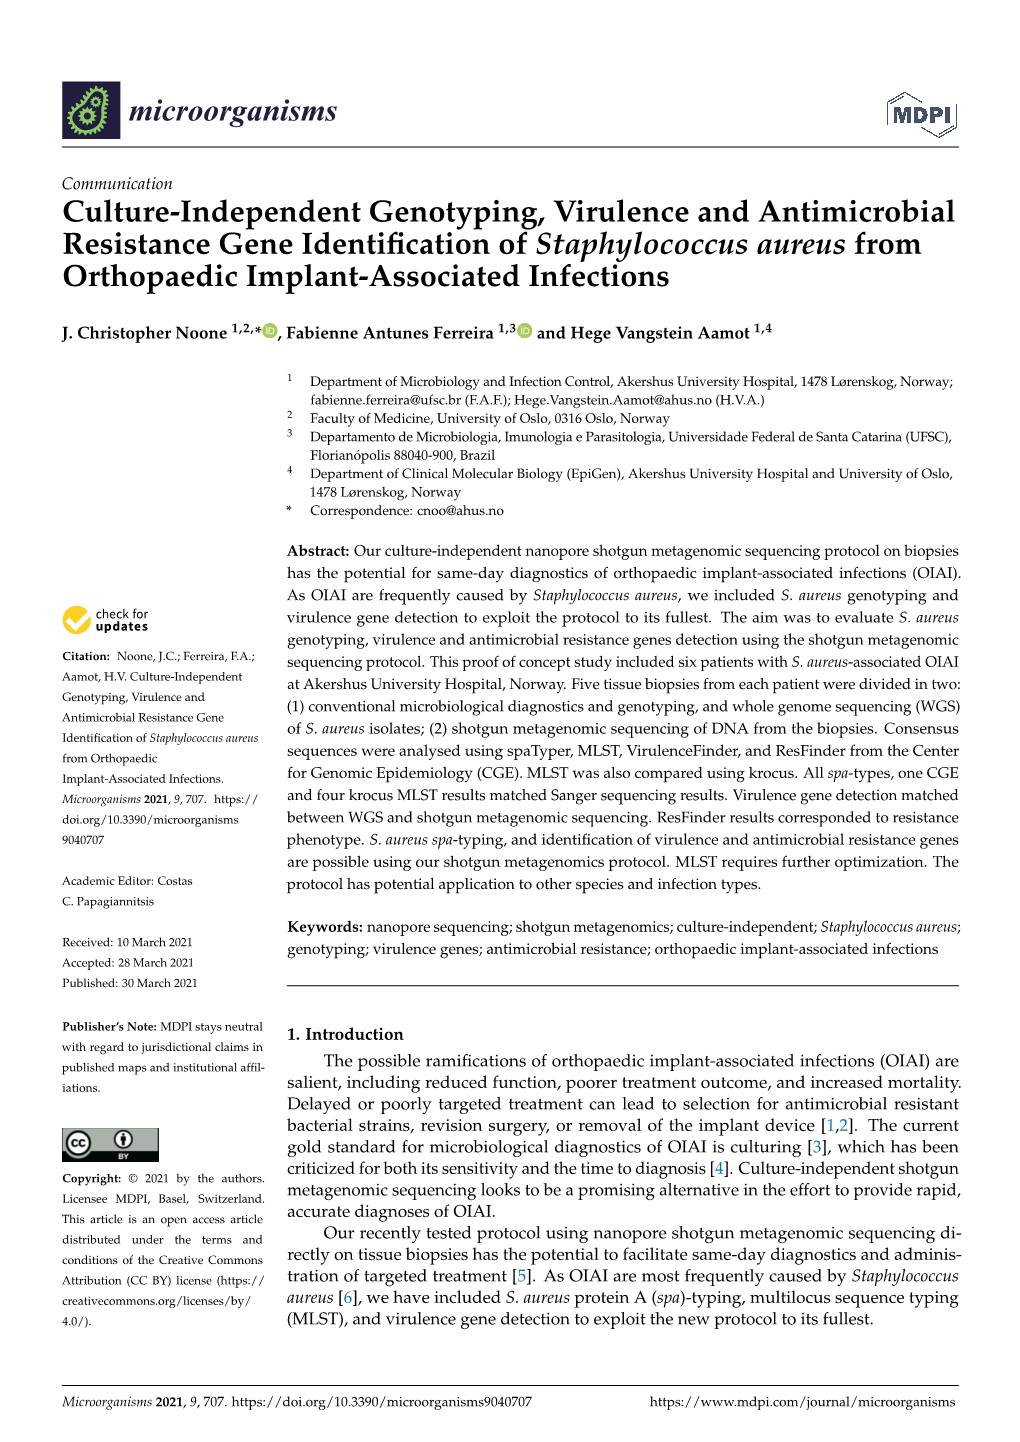 Culture-Independent Genotyping, Virulence and Antimicrobial Resistance Gene Identiﬁcation of Staphylococcus Aureus from Orthopaedic Implant-Associated Infections